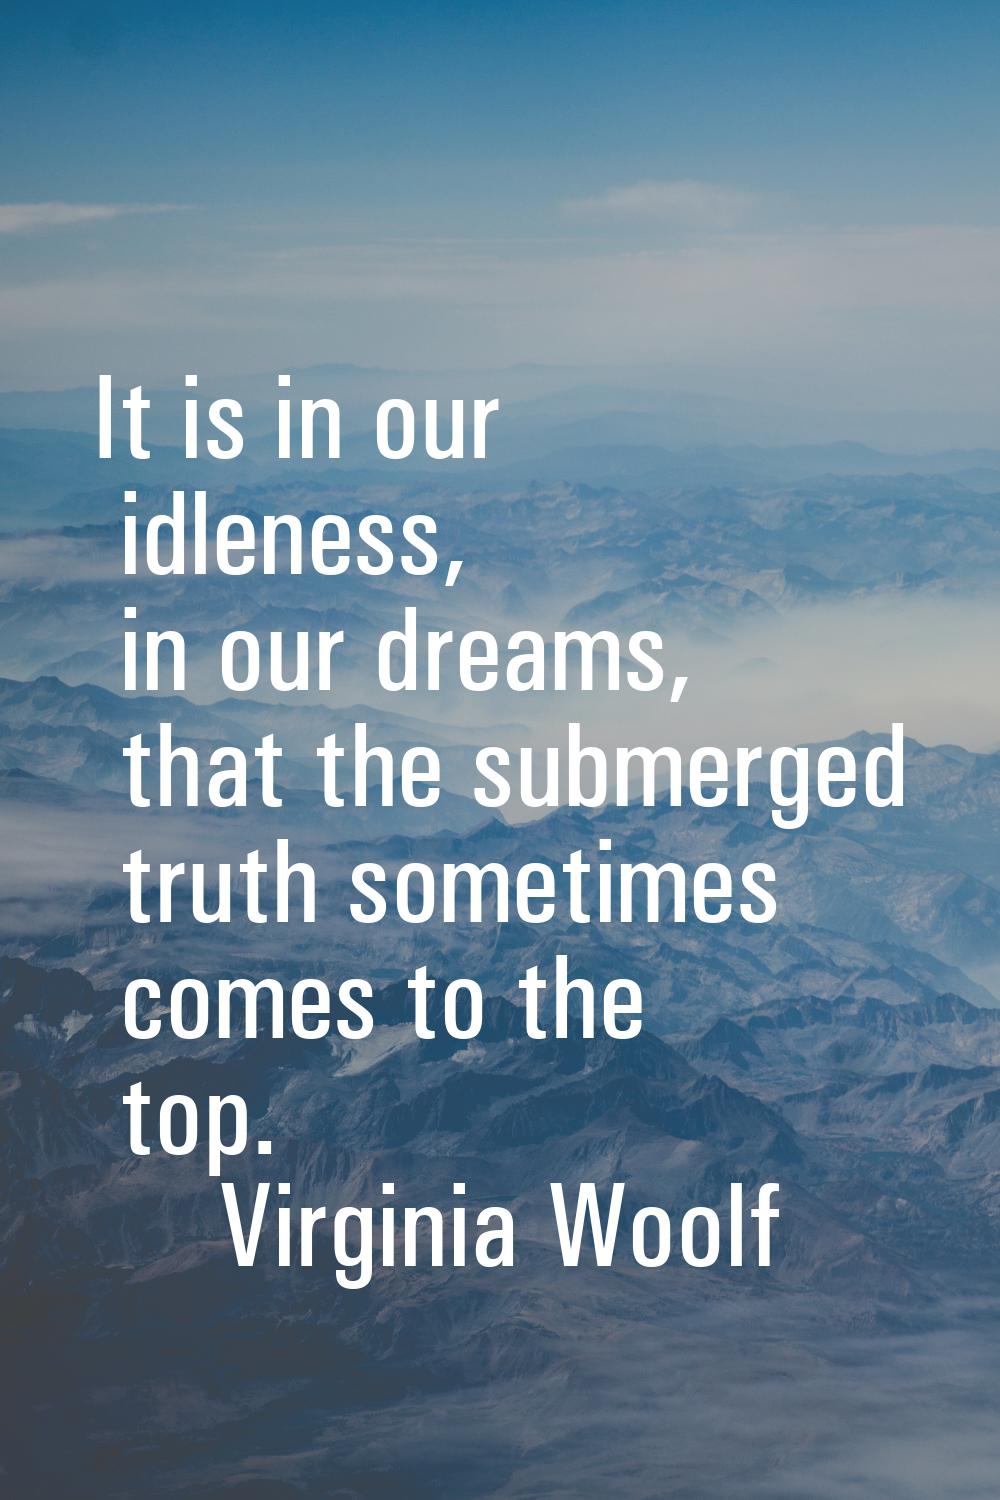 It is in our idleness, in our dreams, that the submerged truth sometimes comes to the top.